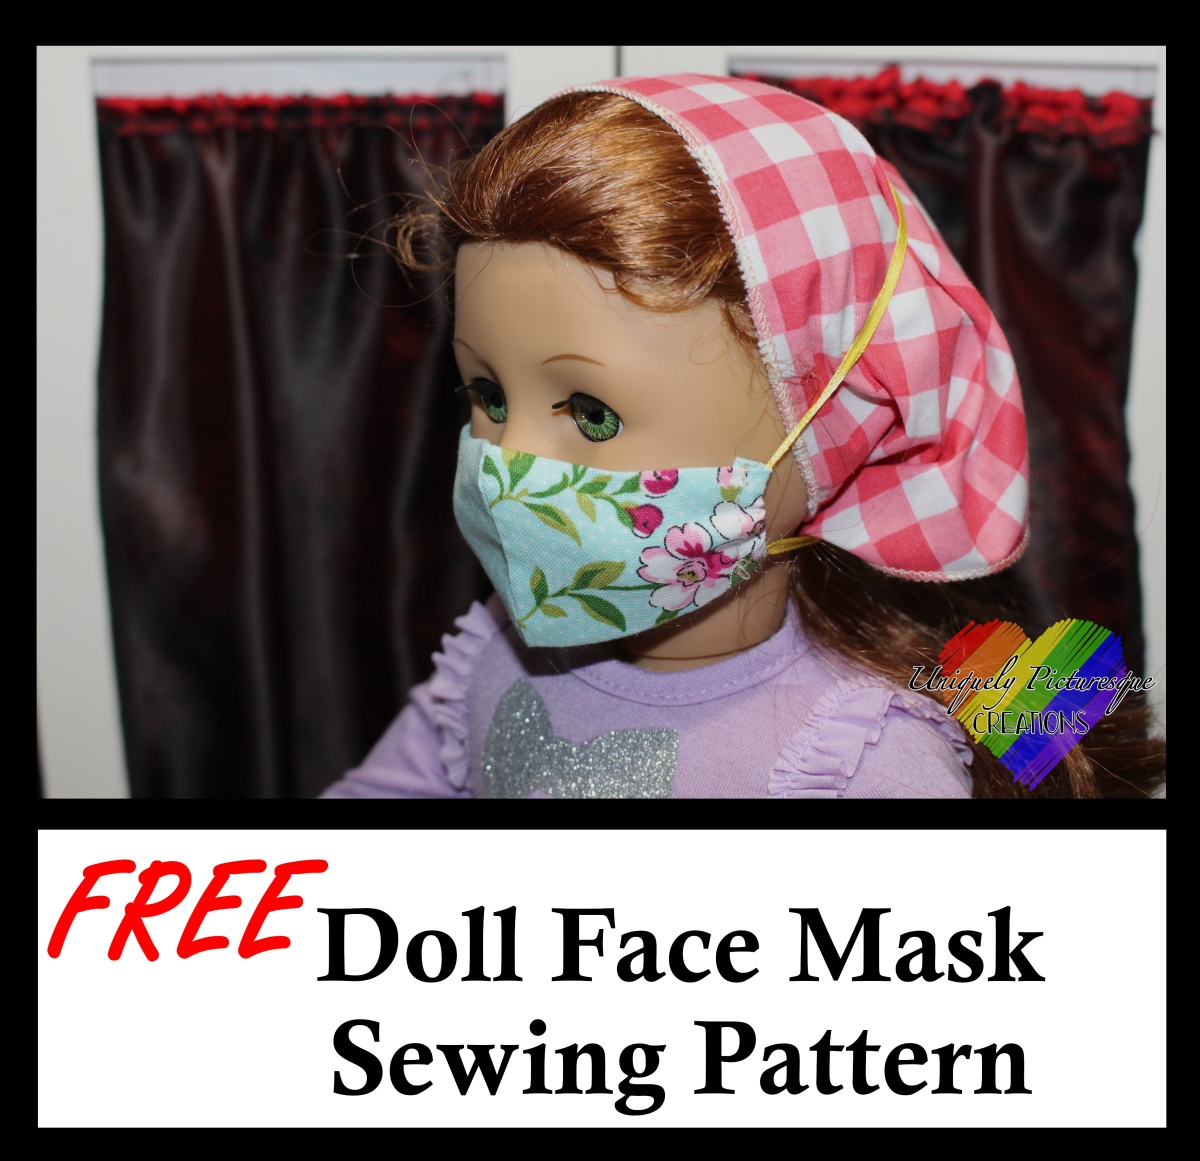 FREE Doll Face Mask Sewing Pattern